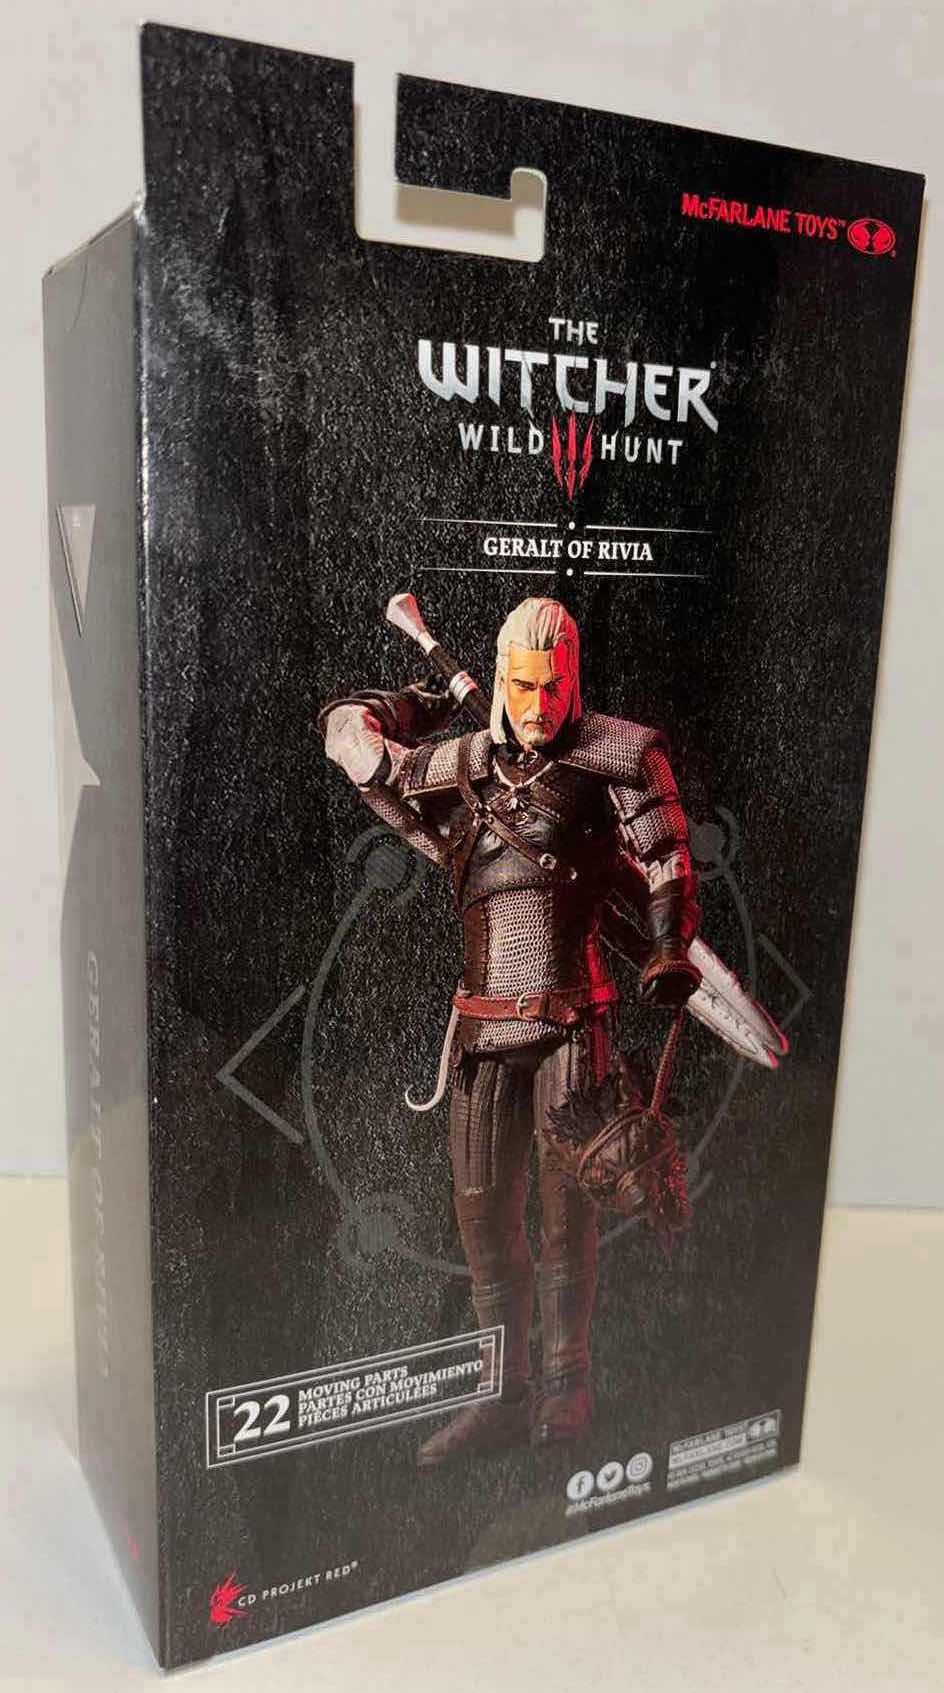 Photo 4 of NEW MCFARLANE TOYS THE WITCHER WILD HUNT “GERALT OF RIVIA” ACTION FIGURE & ACCESSORIES